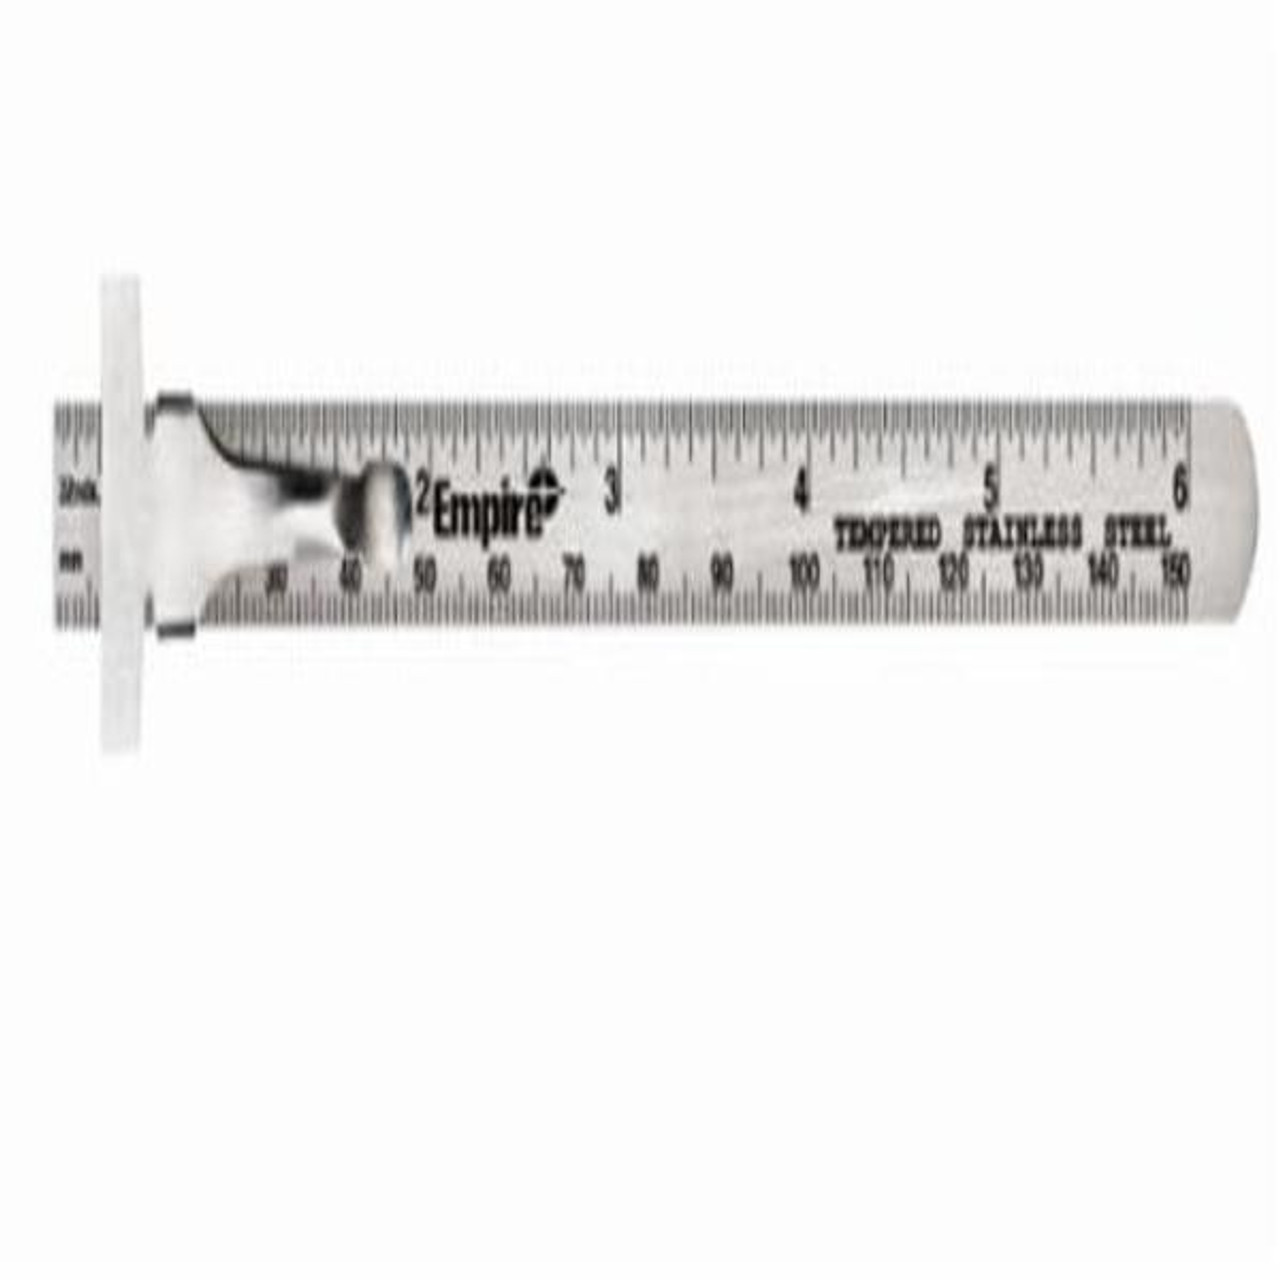 6 Mini Stainless Steel Ruler with Pocket Clip